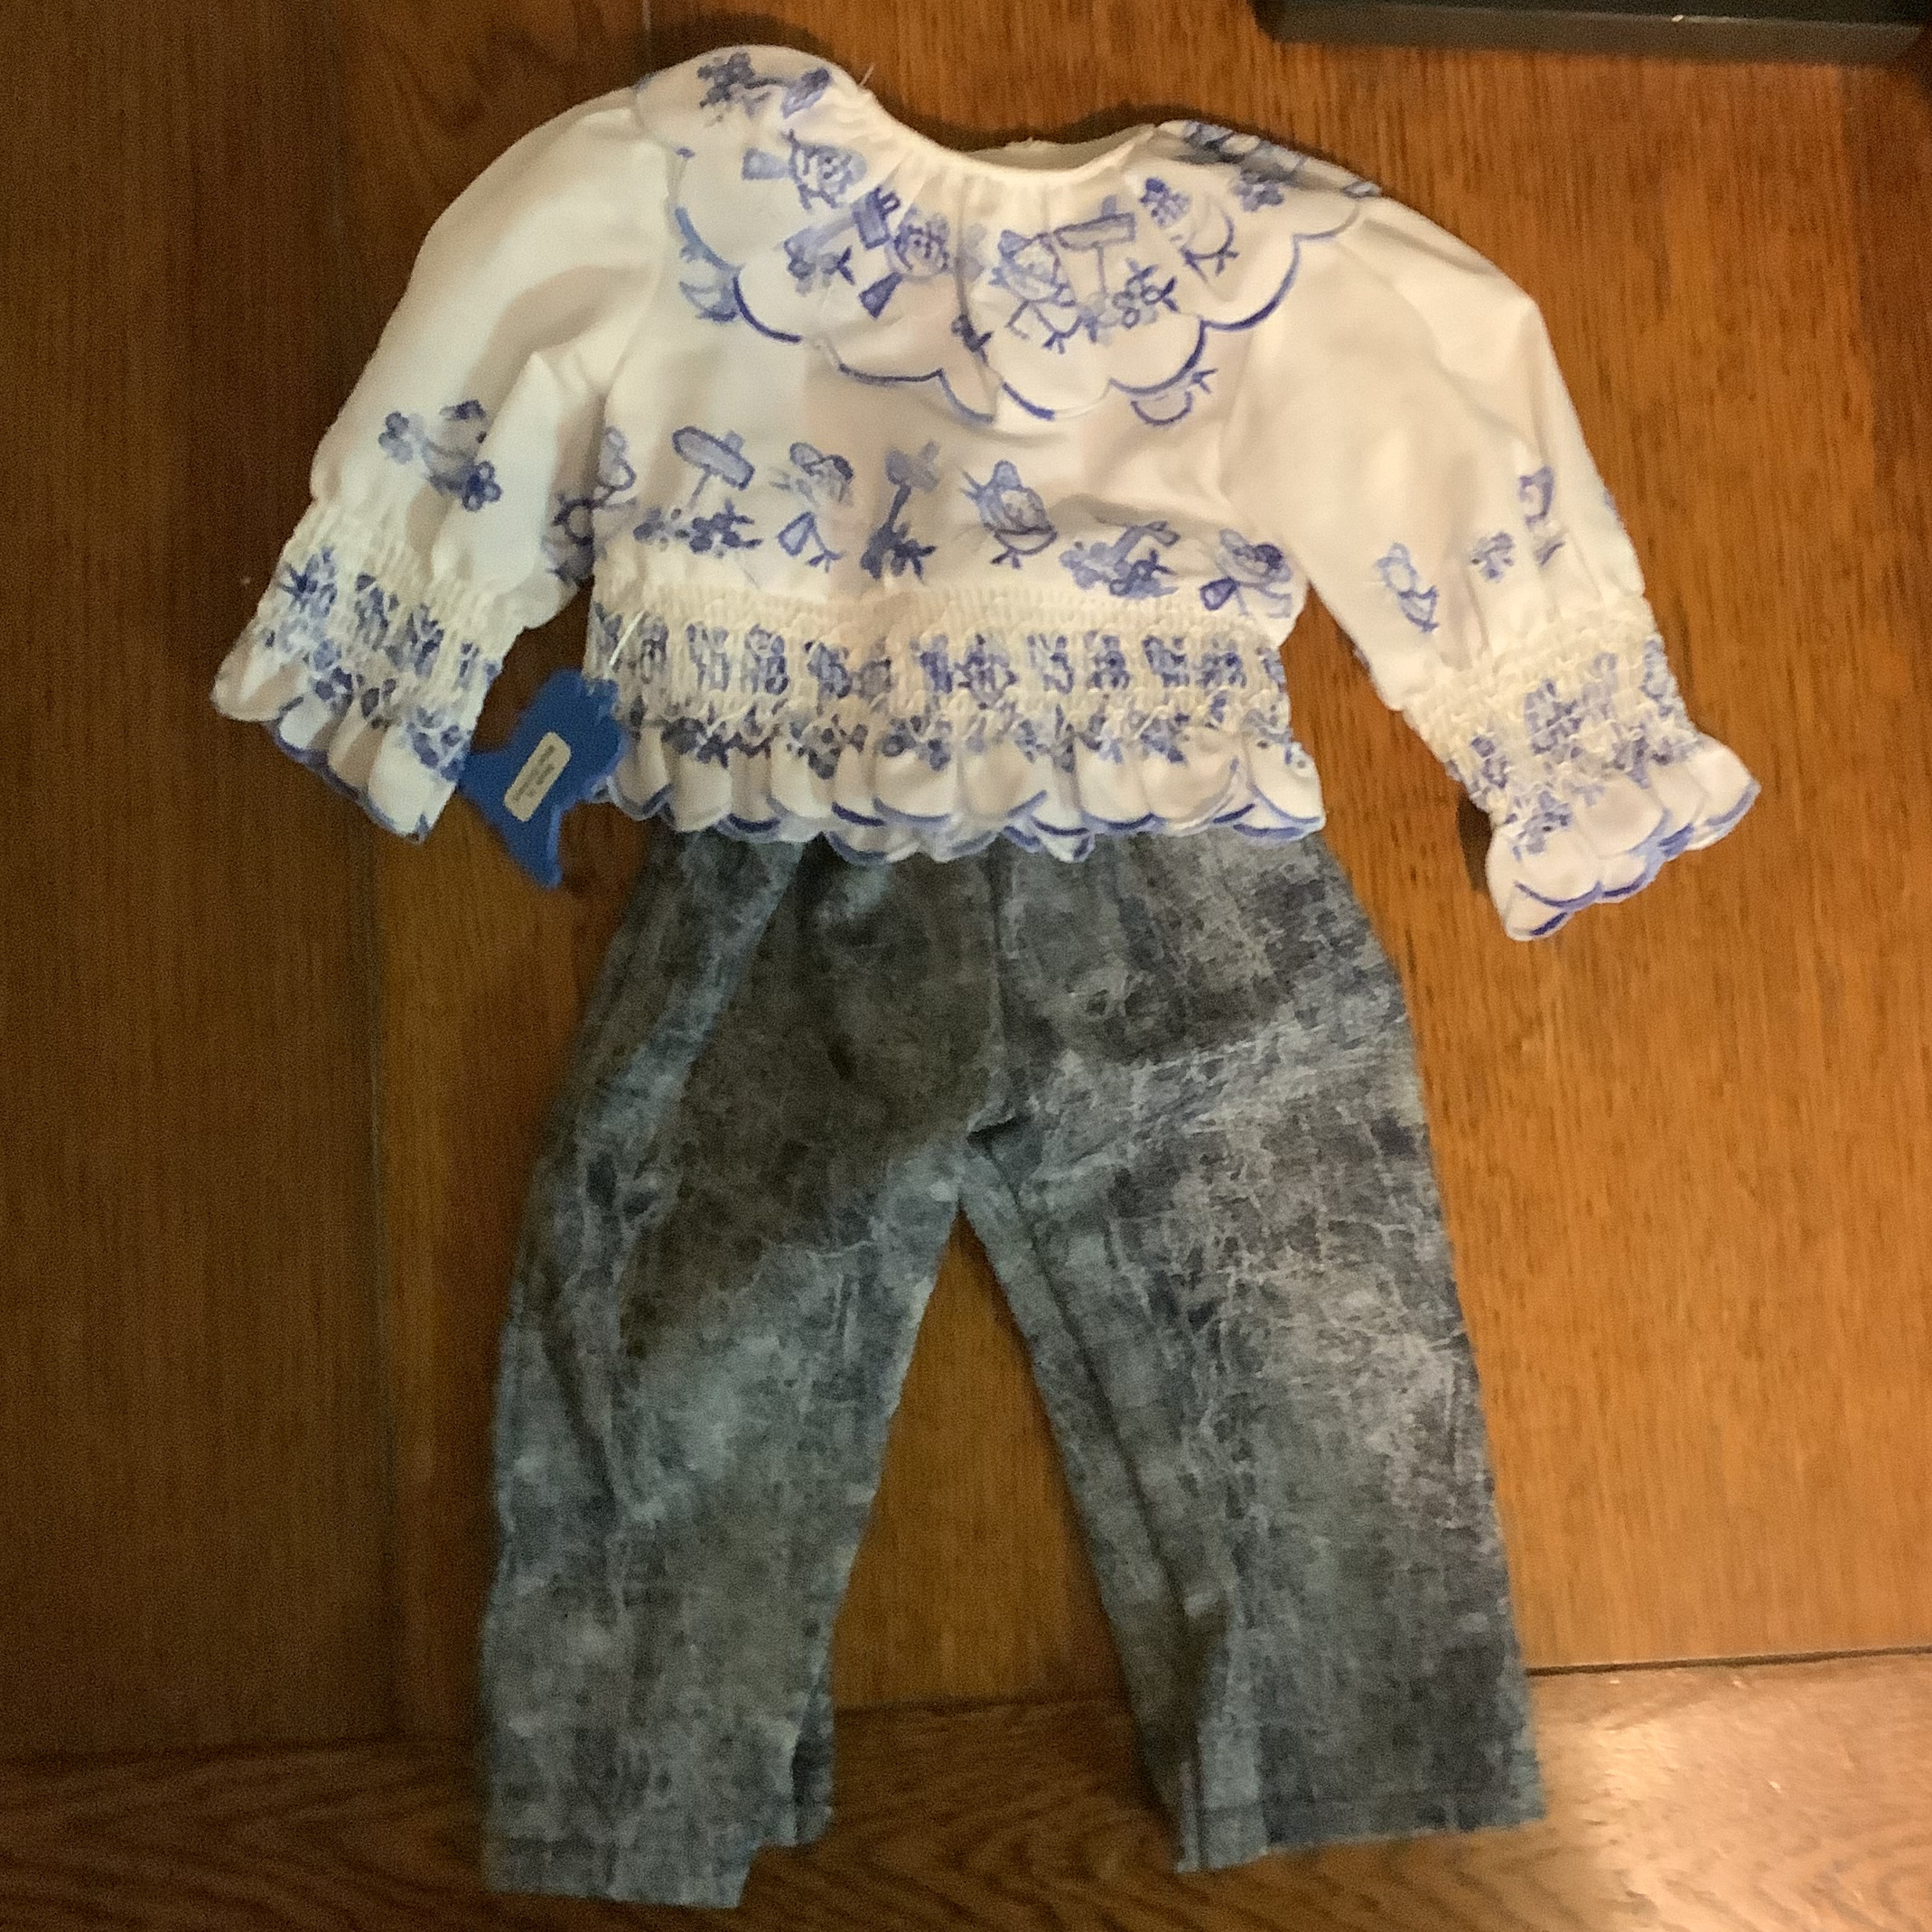 blue jeans and white smocked cotton shirt printed with small birds and play scenes